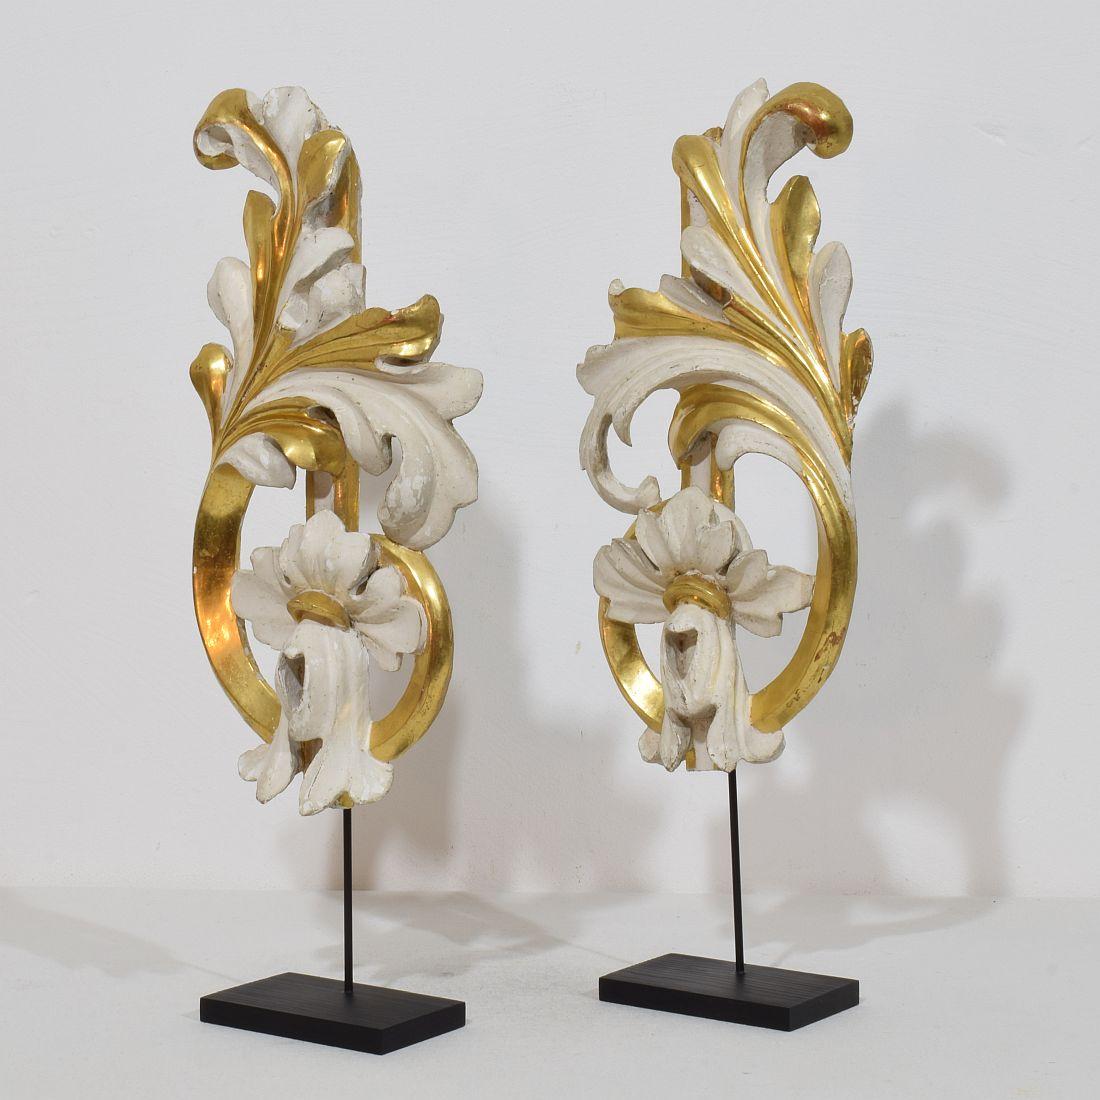 Beautiful handcarved giltwood acanthus leaf curl ornaments that once adorned a chapel .Original period pieces that due their high age have a wonderful weathered look.
Italy circa 1780/1850 , weathered,small losses and old repairs.
Measurements are